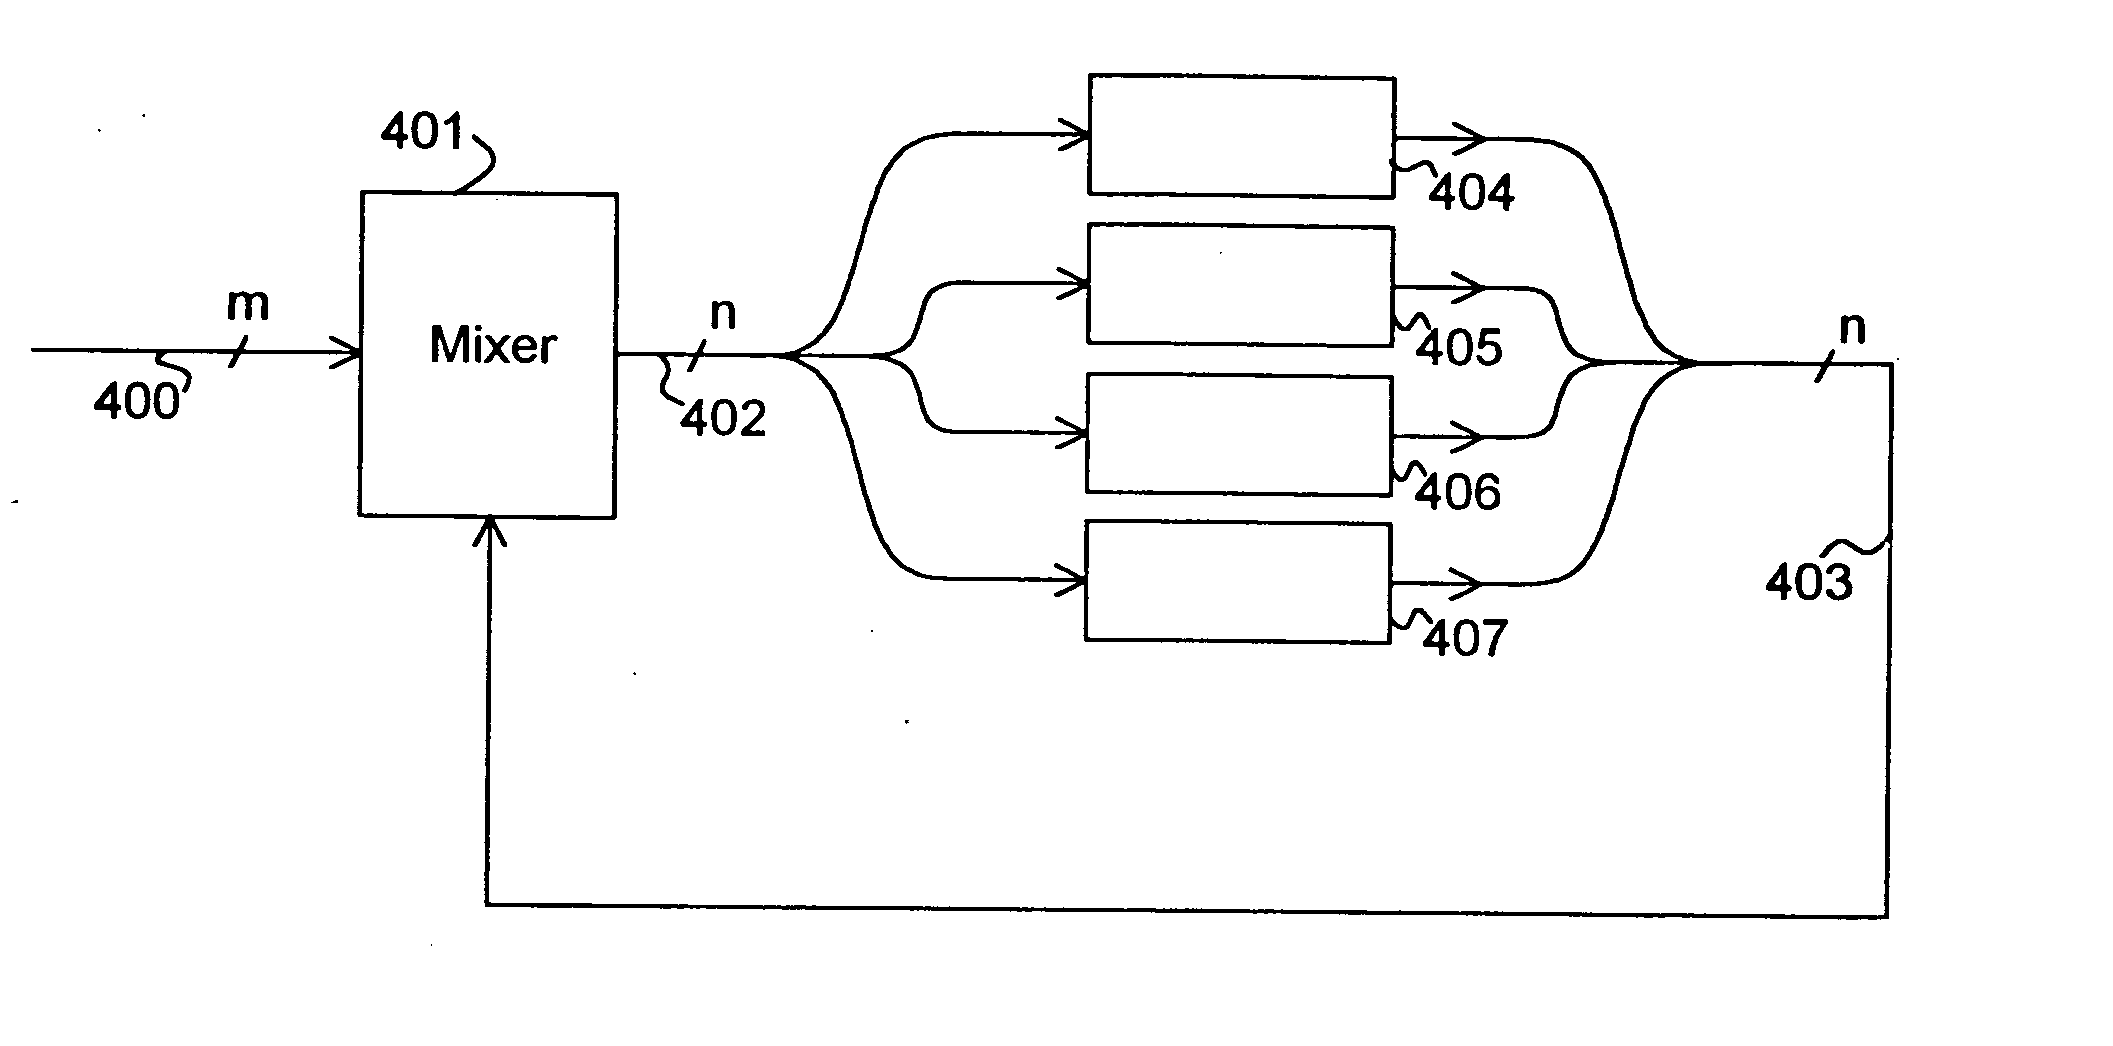 Artificial ambiance processing system